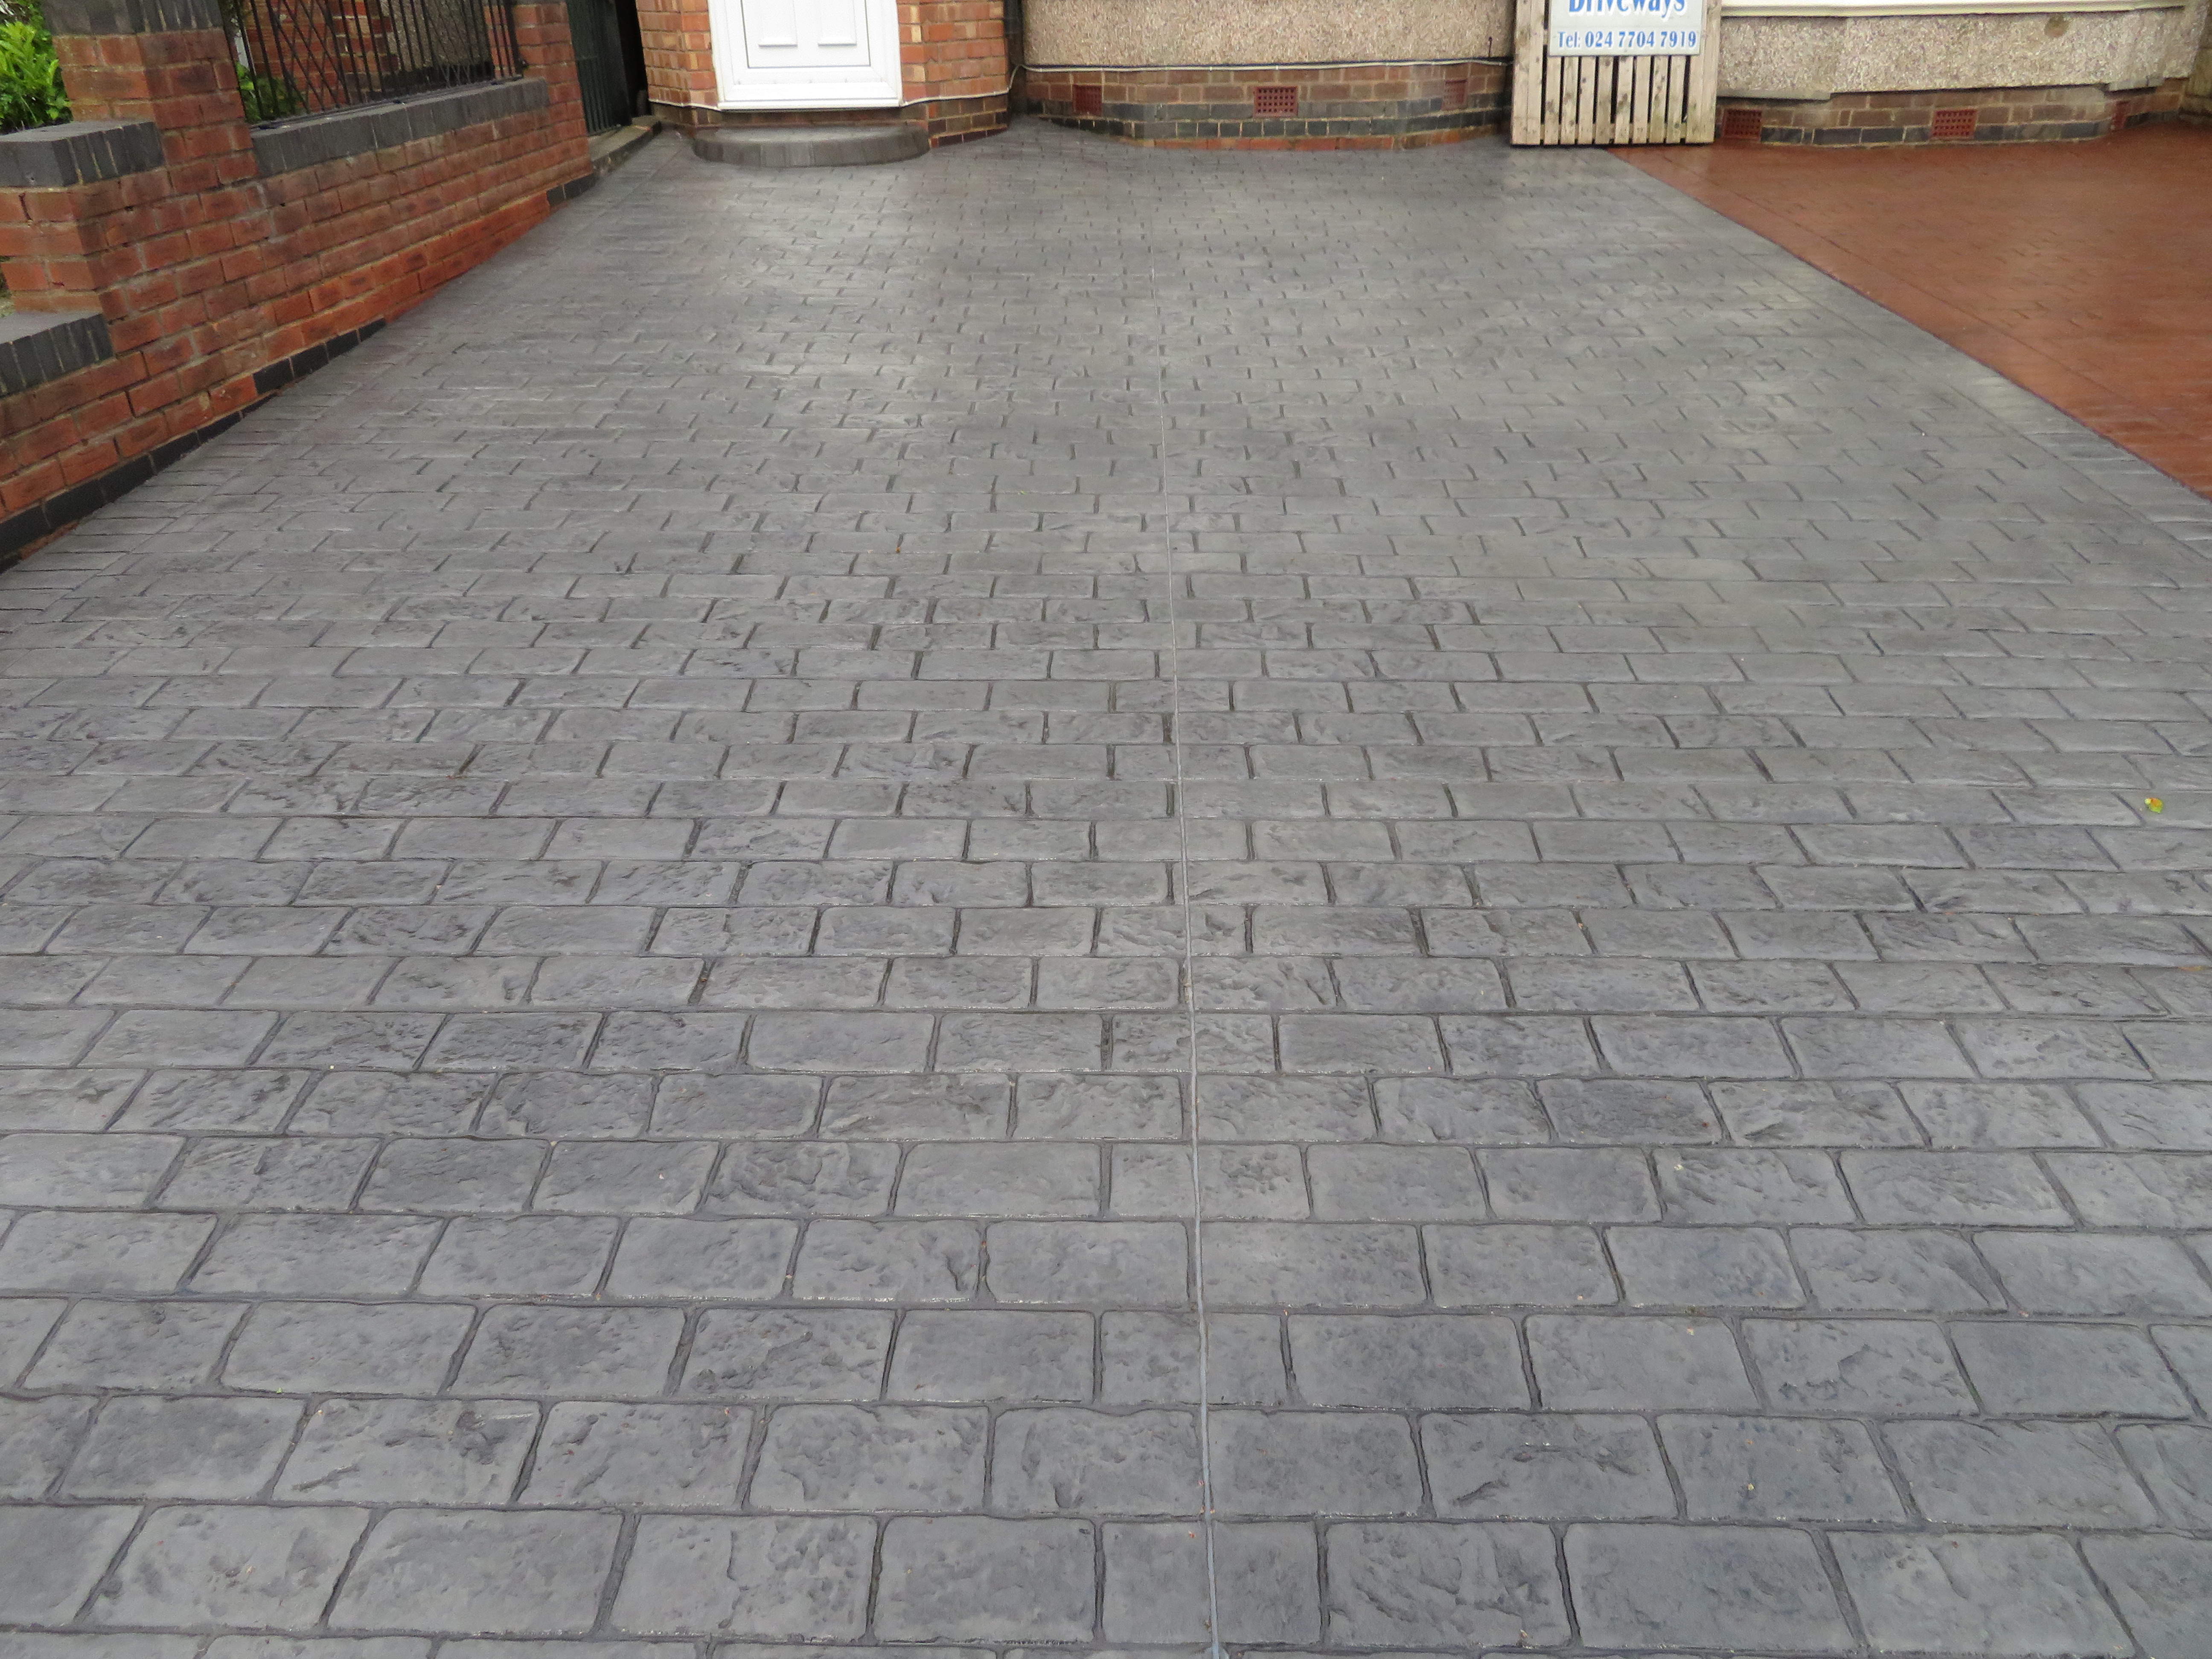 Pattern Imprinted Concrete Driveway done in a Textured Cobble Pattern